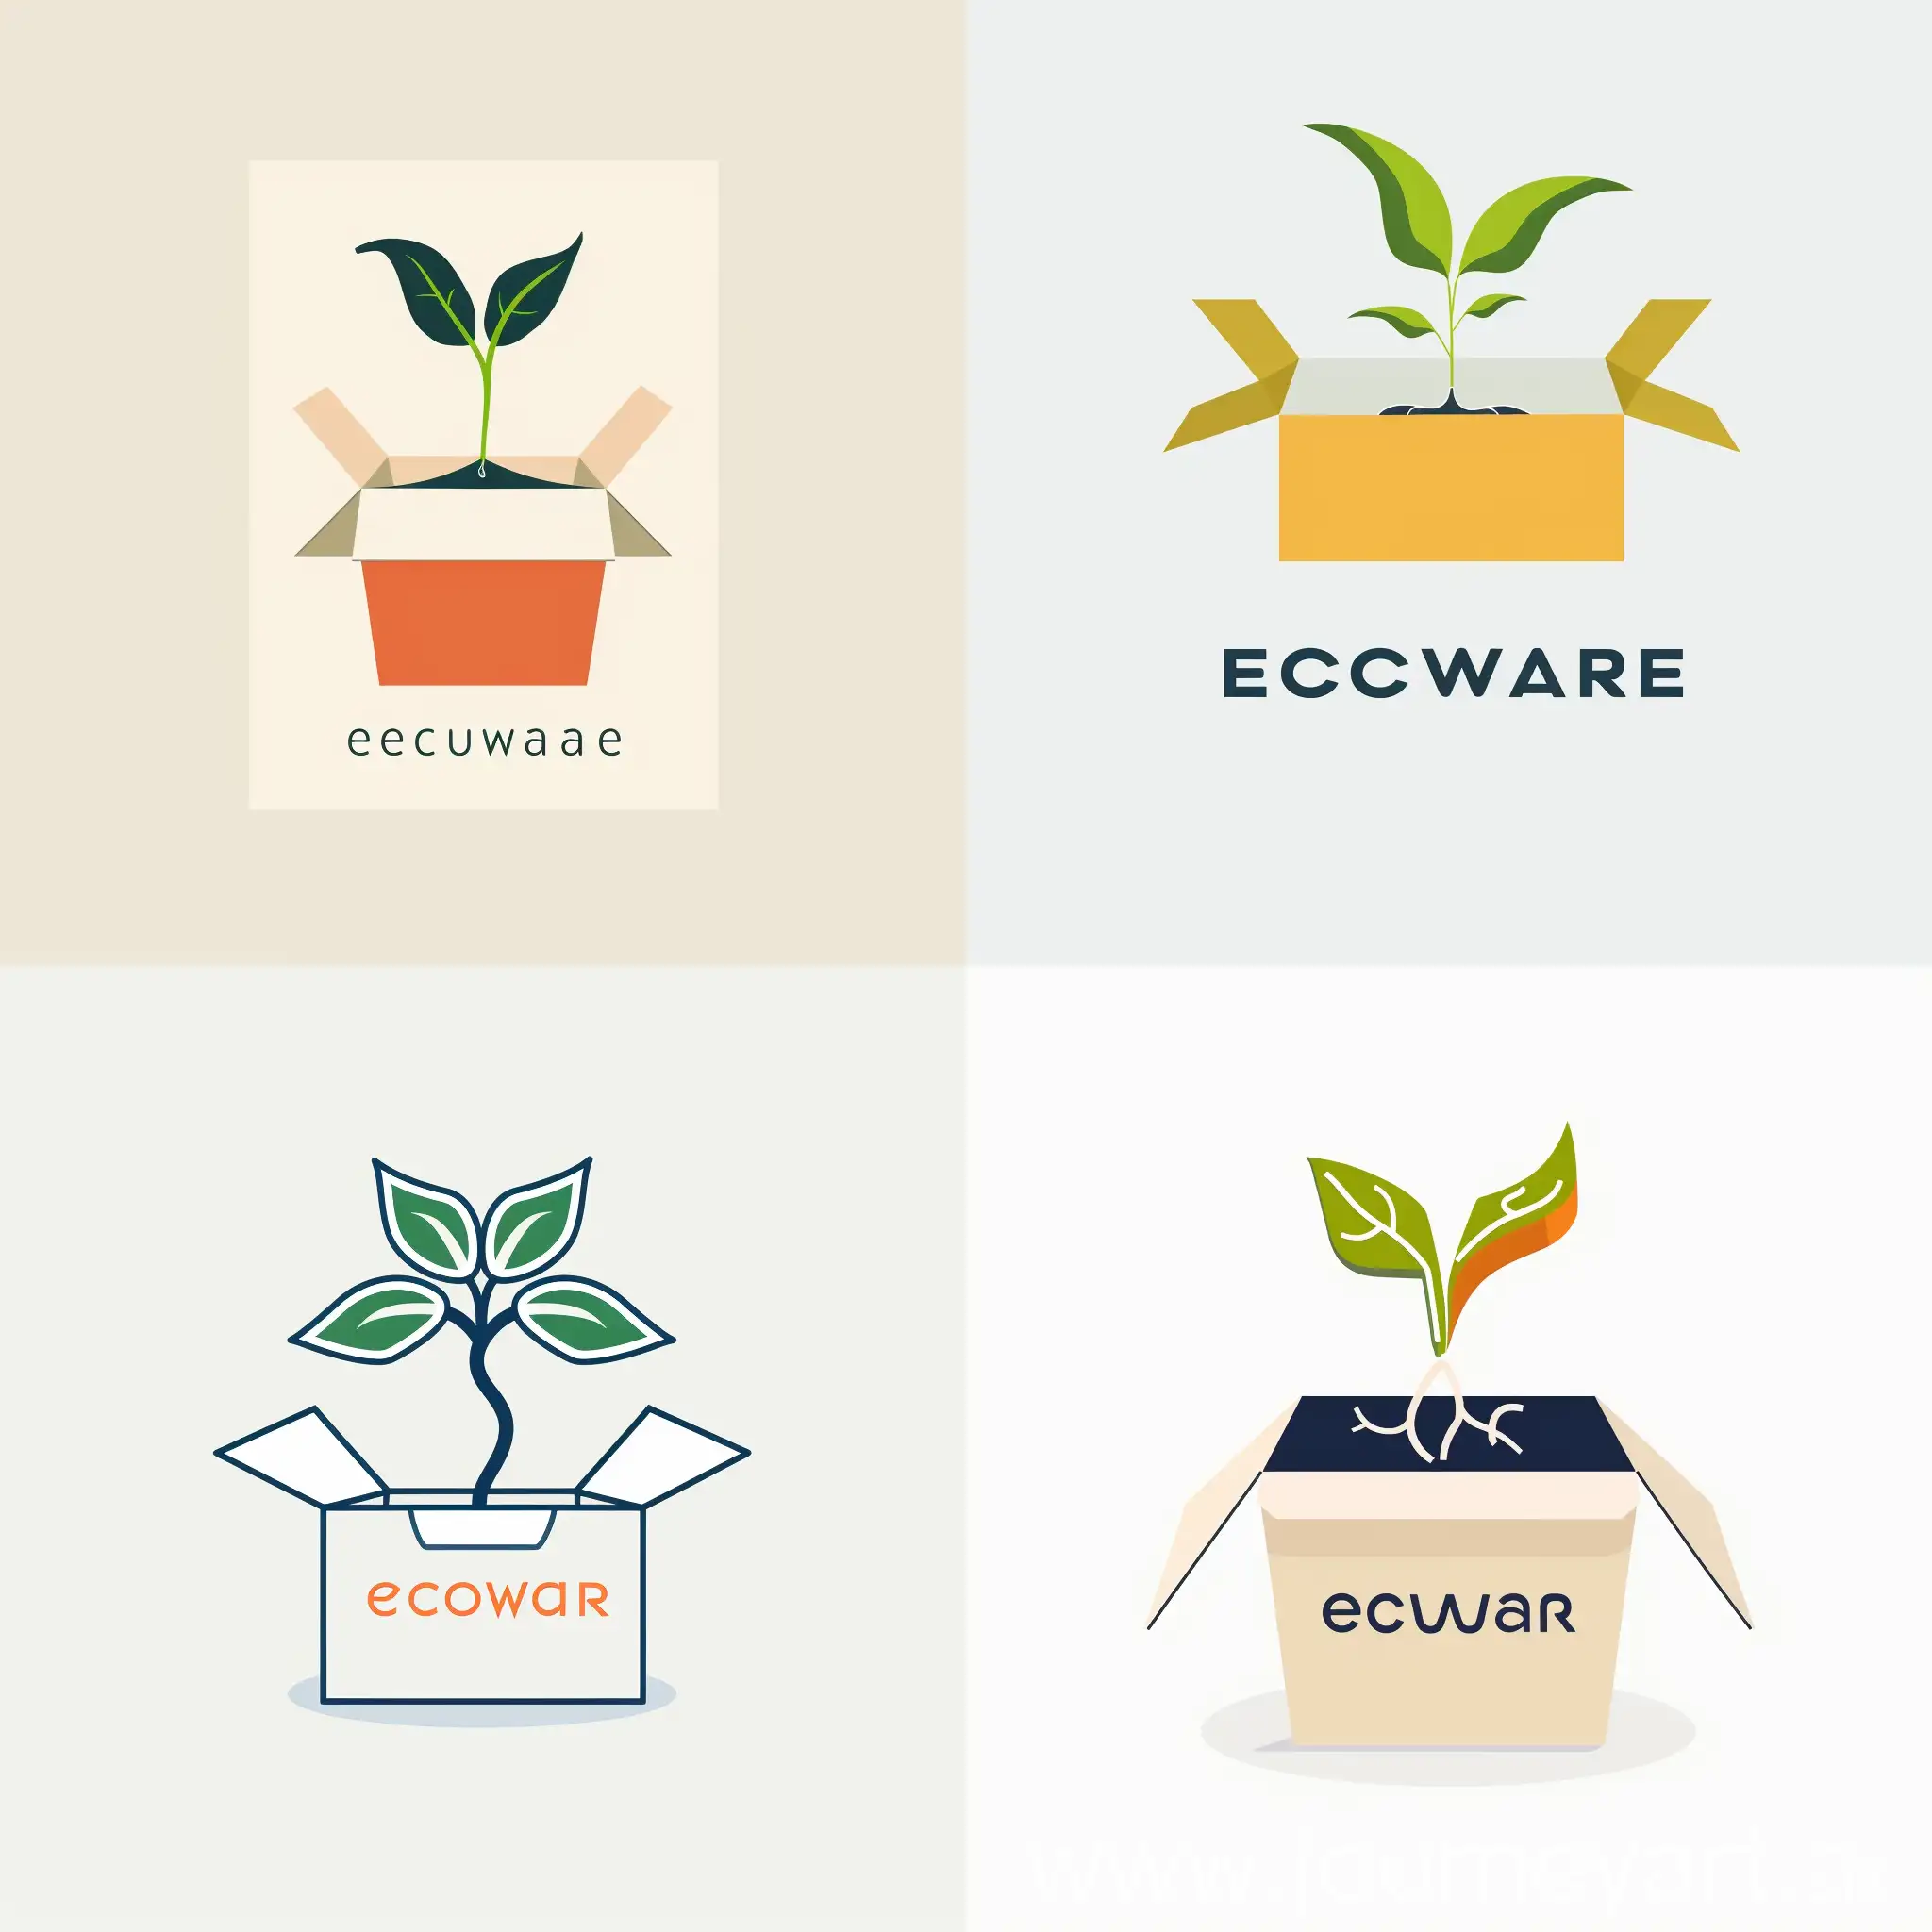 Ecoware-Logo-Design-Minimalistic-Sprout-Breaking-out-of-Takeout-Box